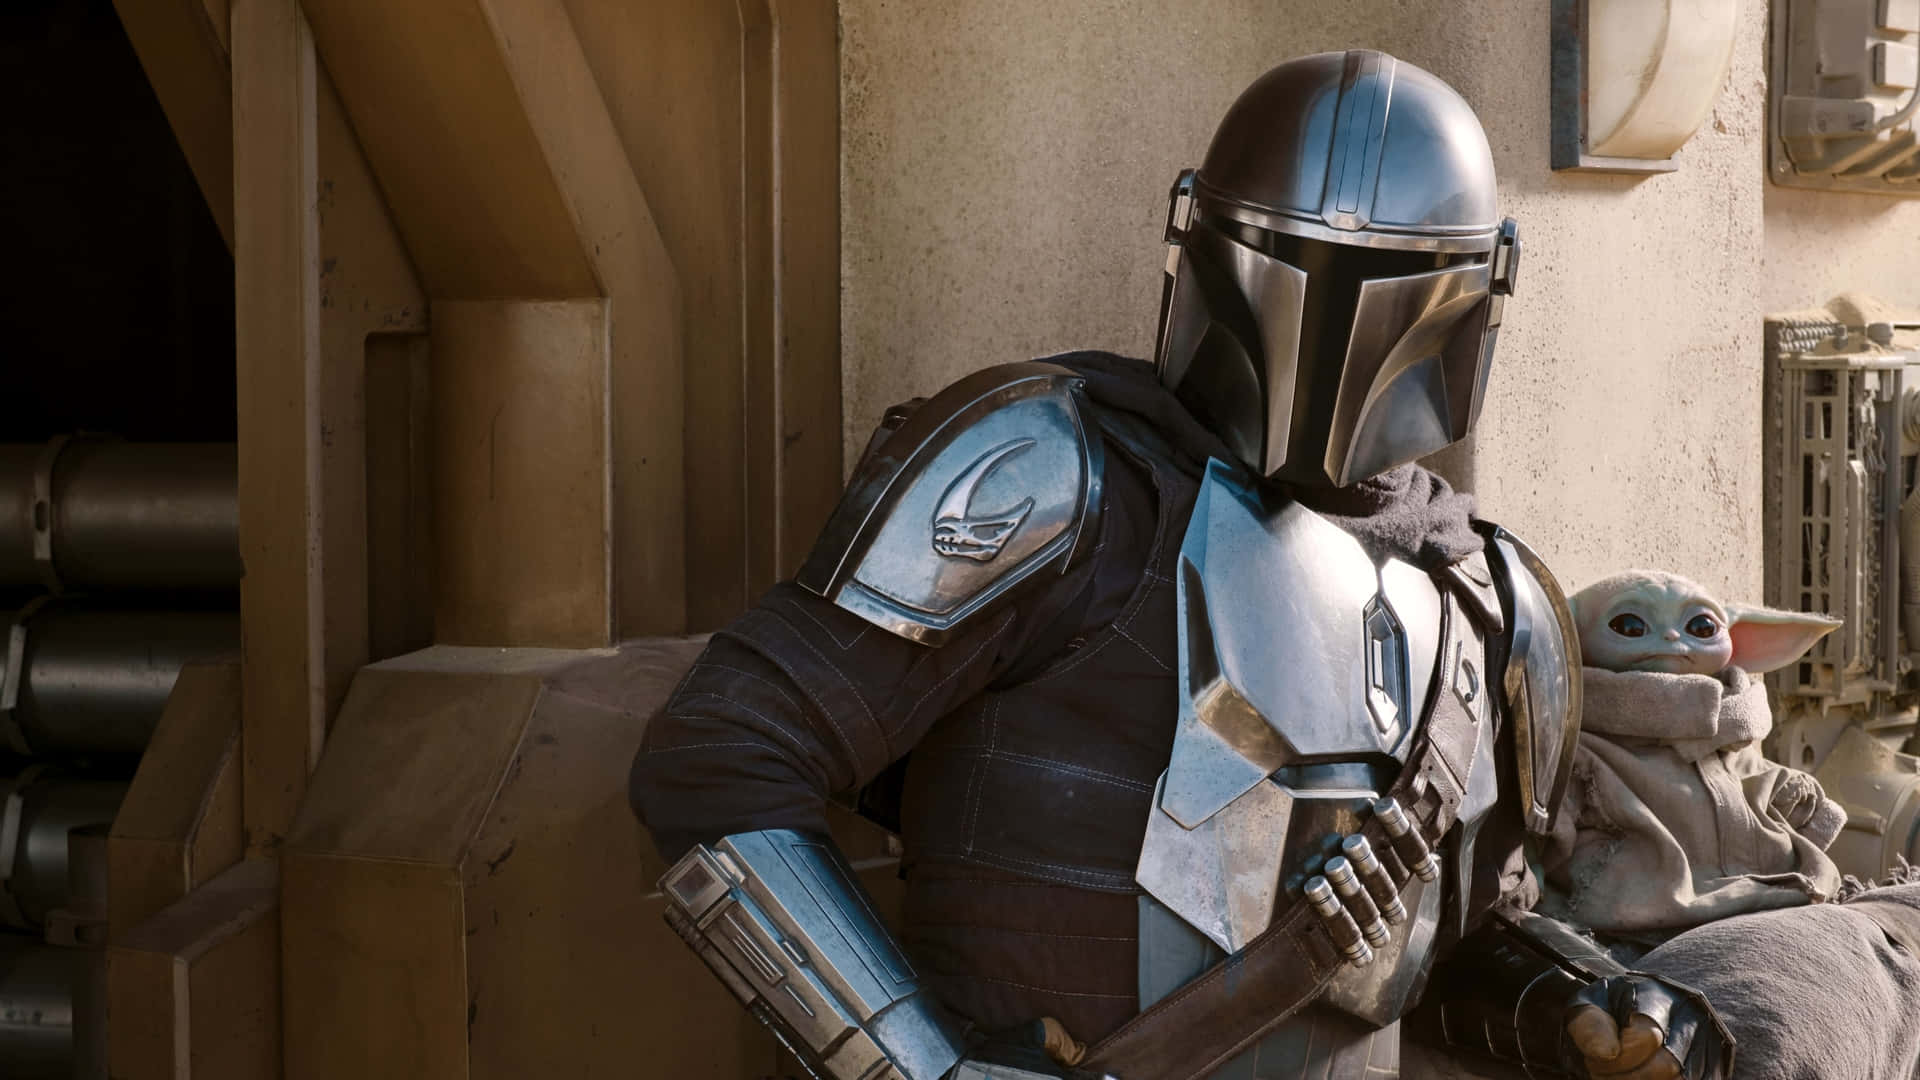 Get Ready for Computing with the Mandalorian PC Wallpaper